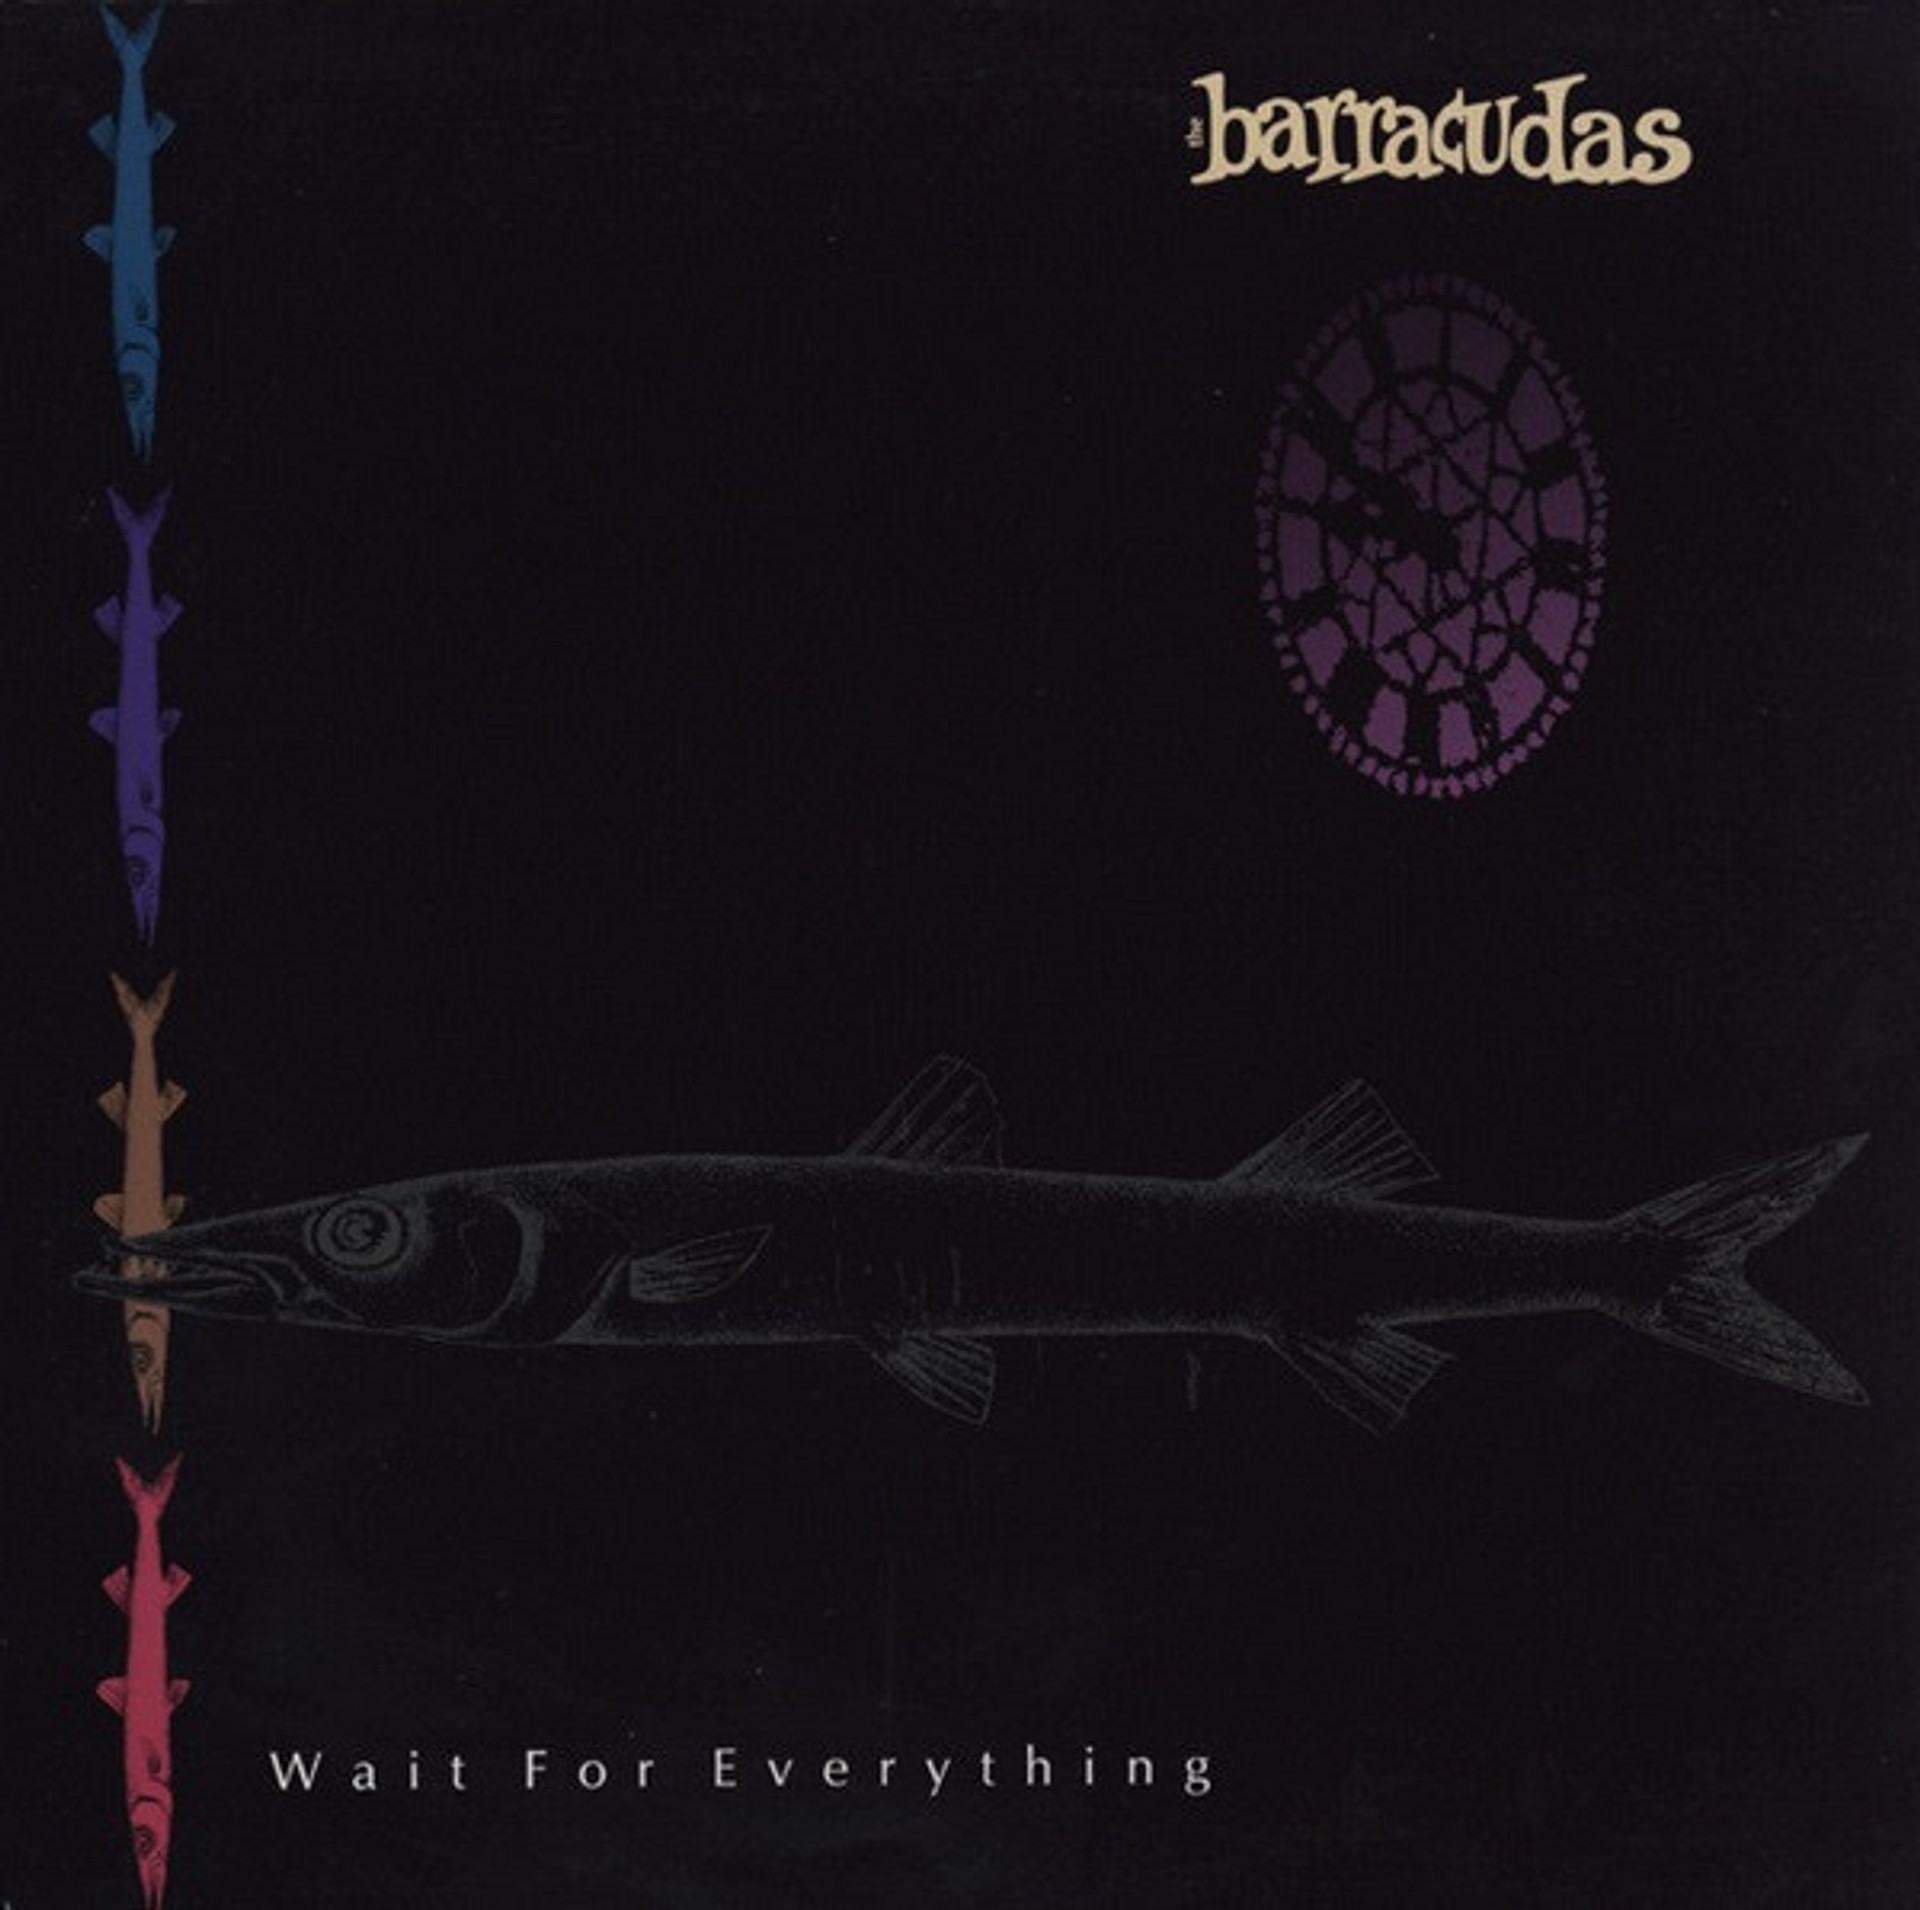 The Barracudas - Wait For Everything (1991 Limited Edition Red Vinyl ...